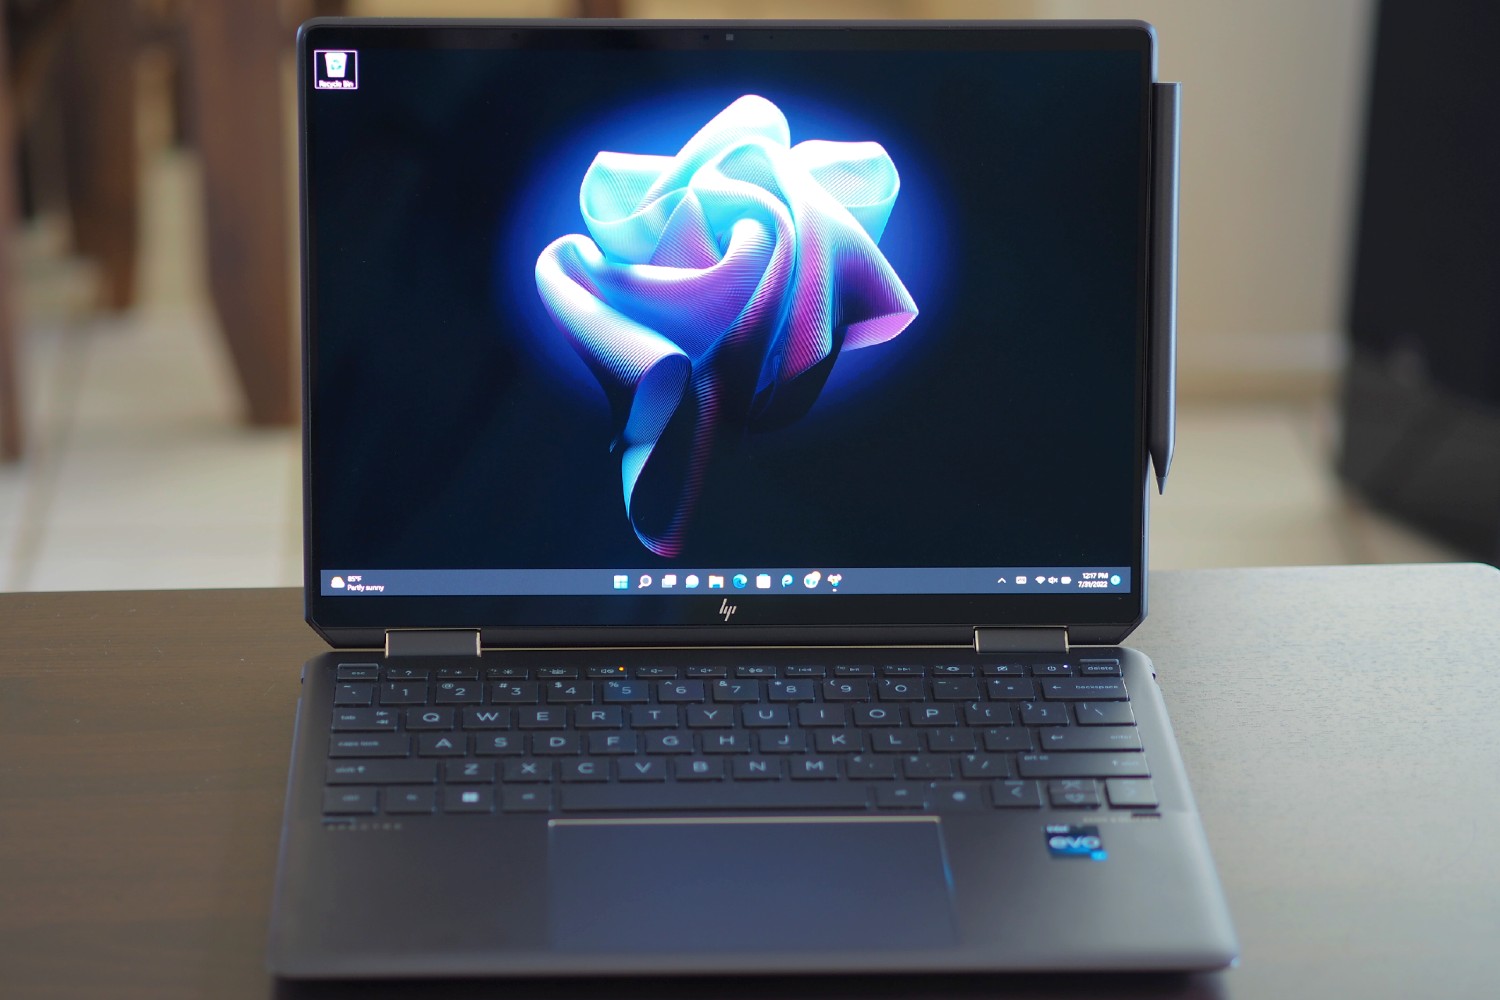 HP's new Spectre x360 is probably the best PC laptop around